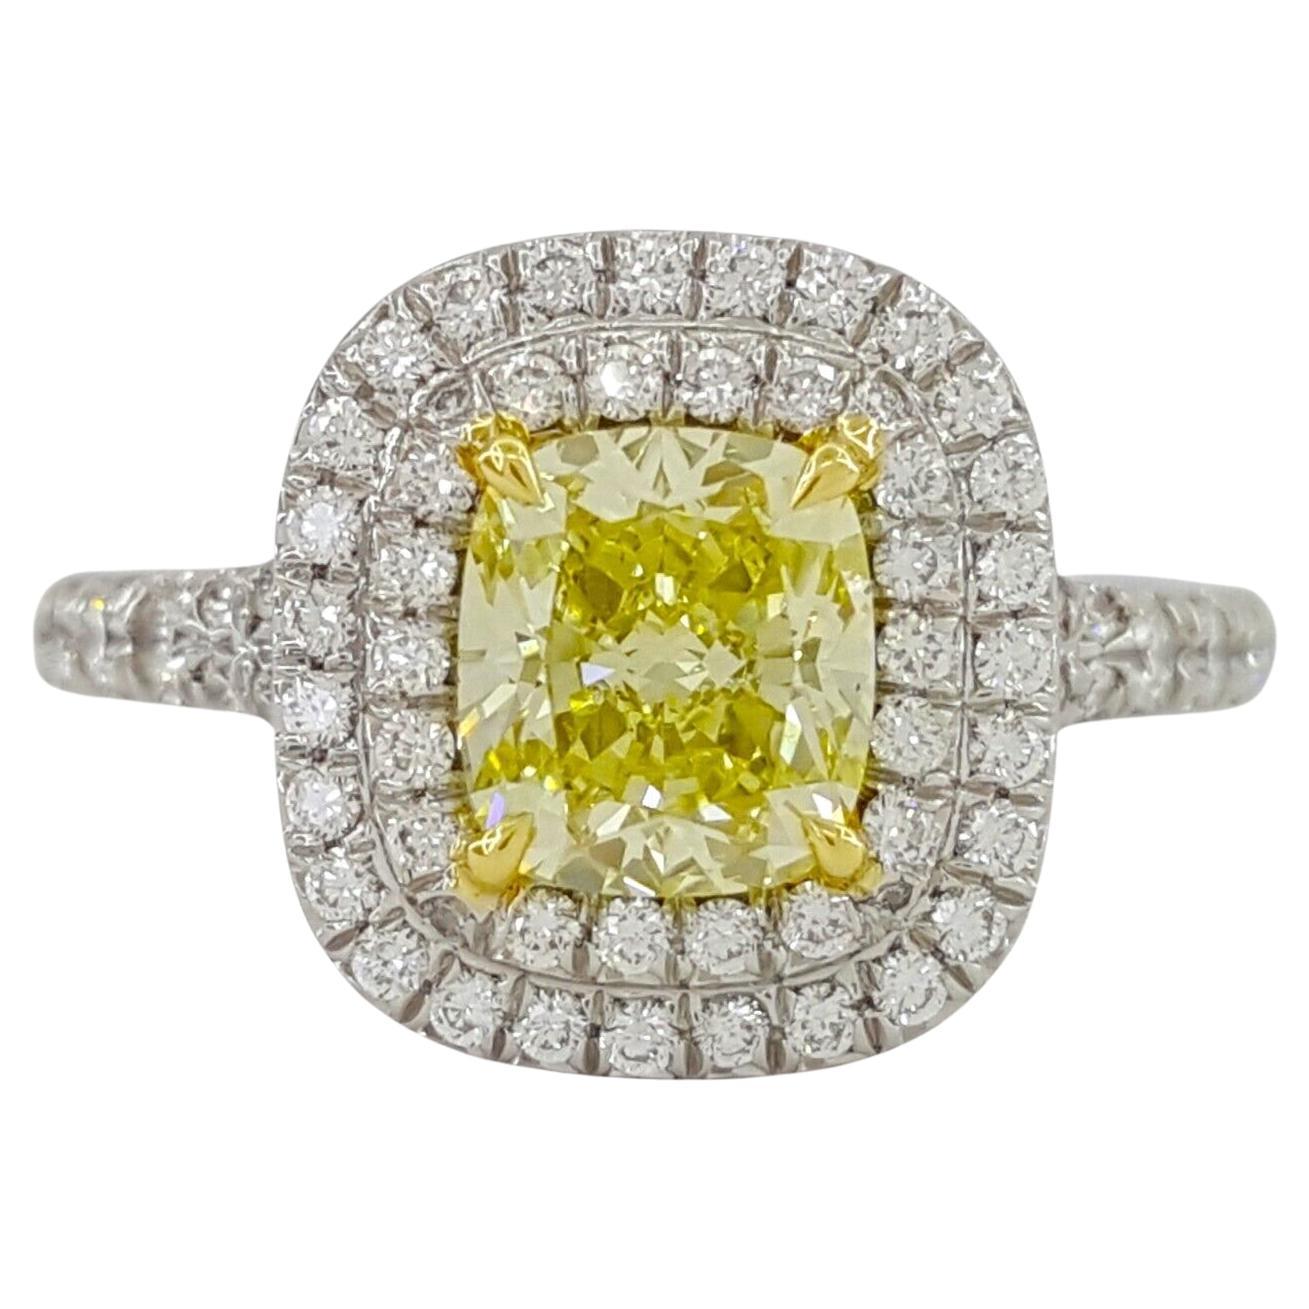 Tiffany & Co. Soleste Fancy Intense Yellow Halo Diamond Engagement Ring For Sale 2